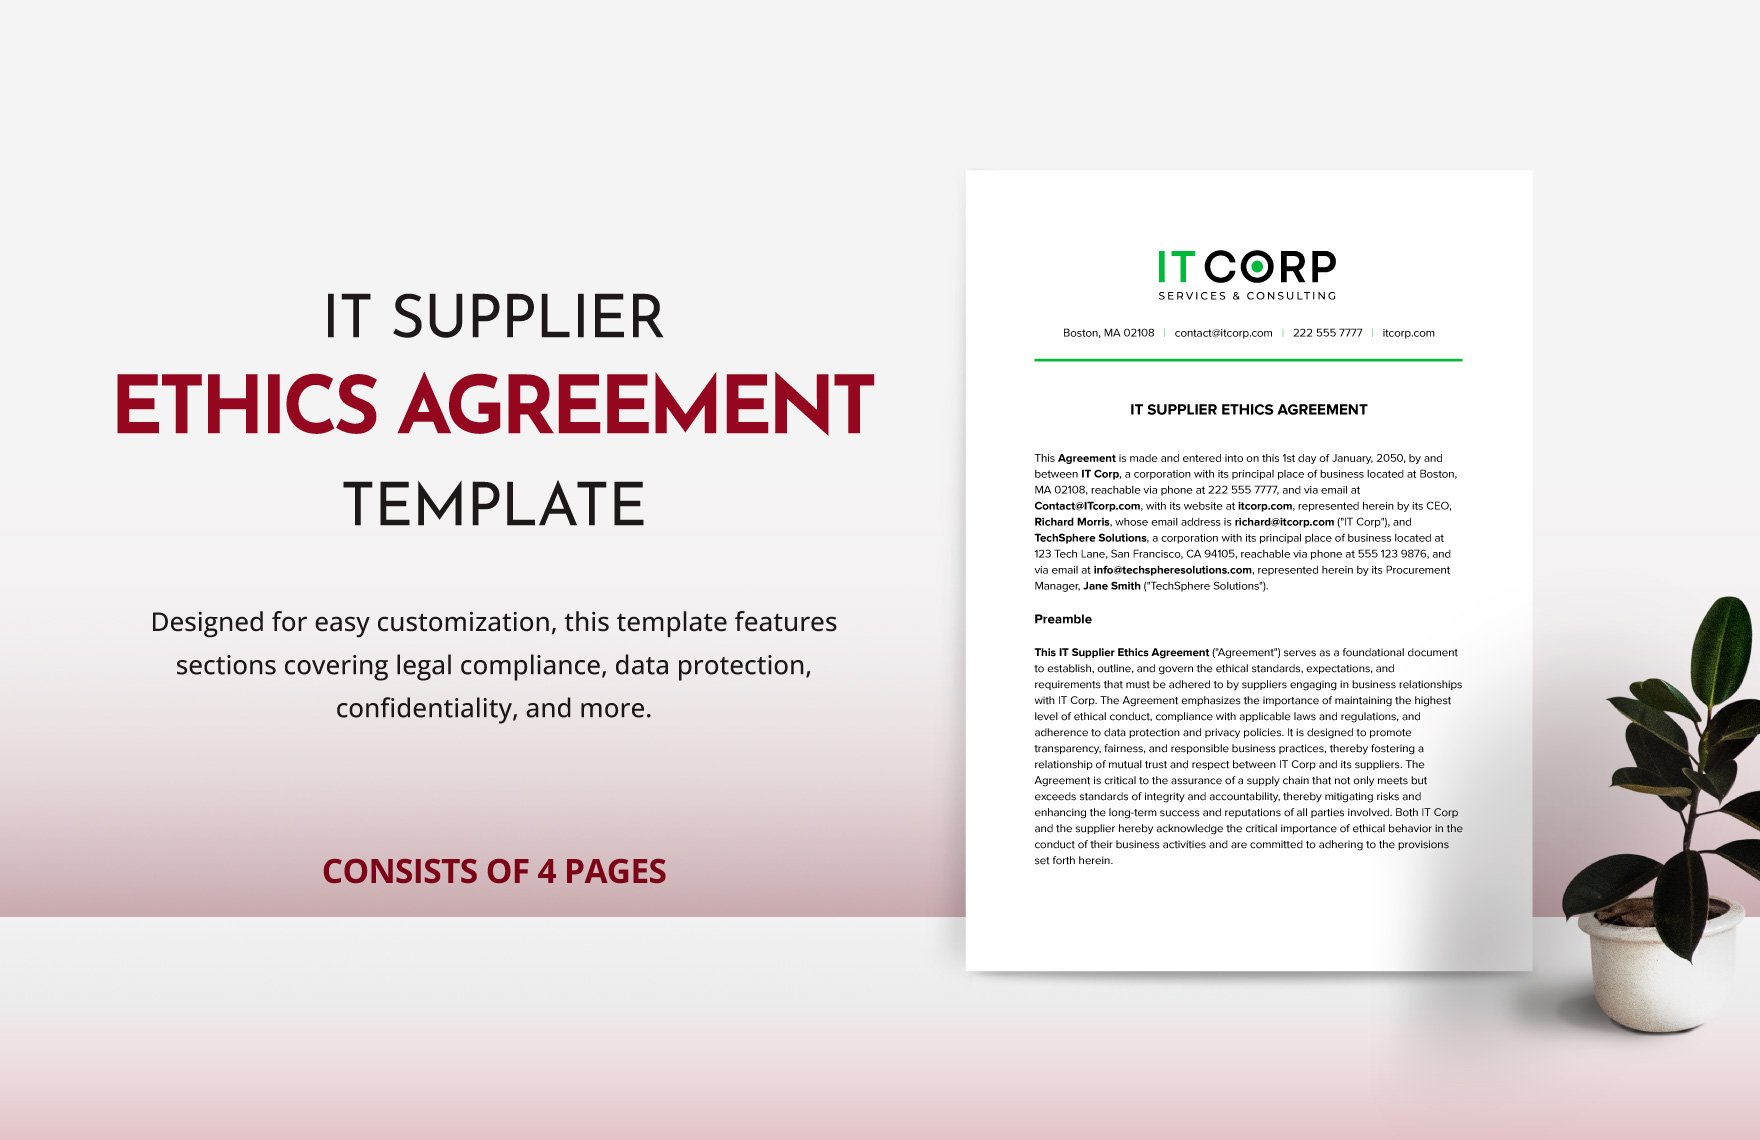 IT Supplier Ethics Agreement Template in Word, Google Docs, PDF